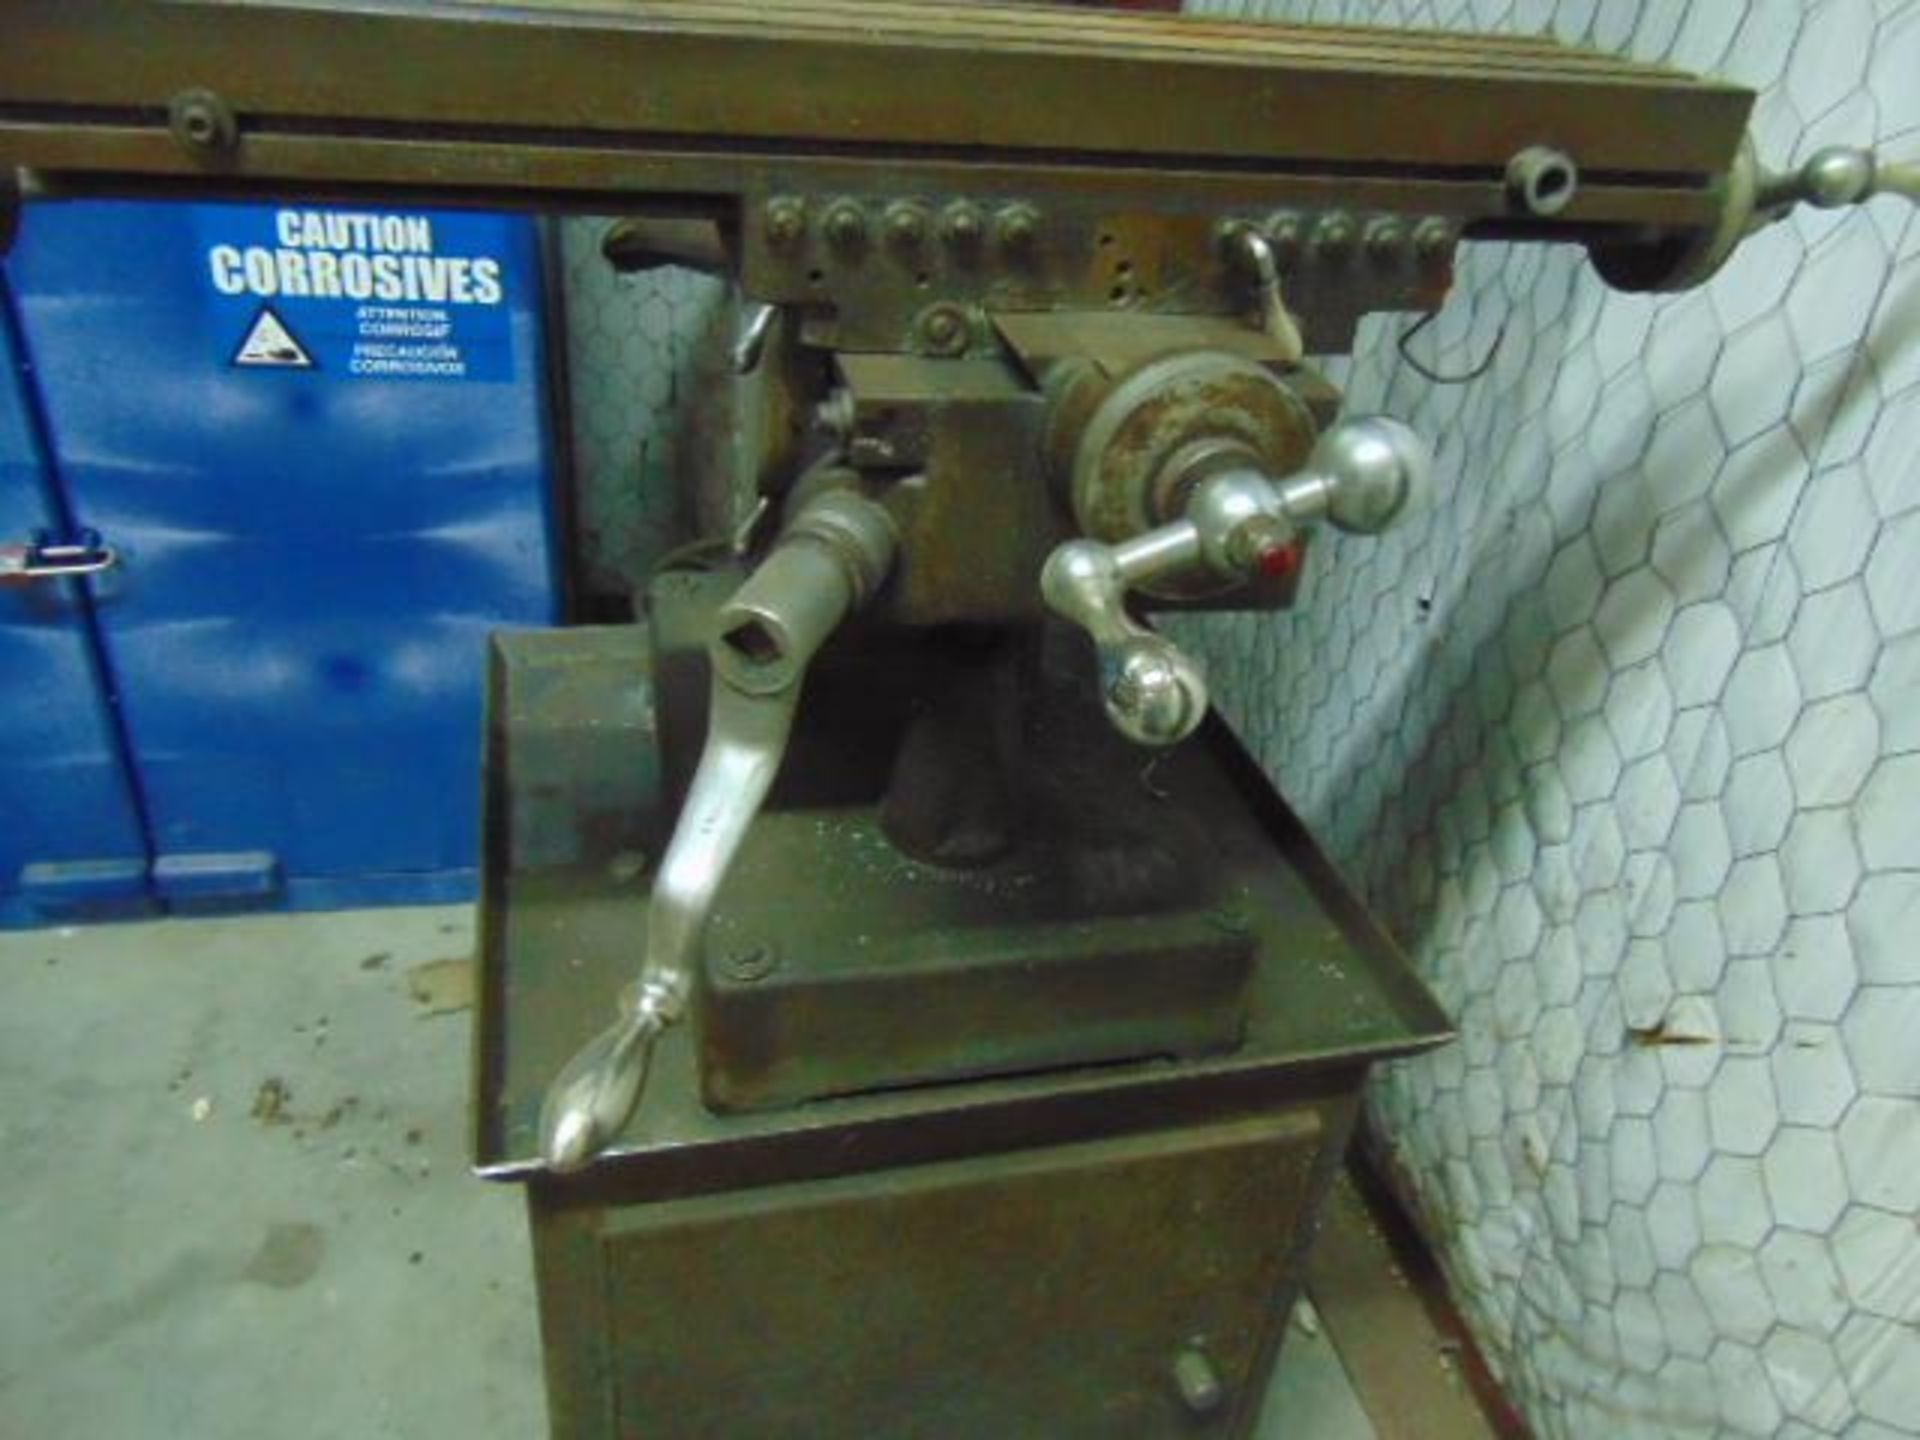 VERTICAL MILLING MACHINE, CLAUSING MDL. 8520, 6" x 24" tbl., S/N 002601 - Image 3 of 6